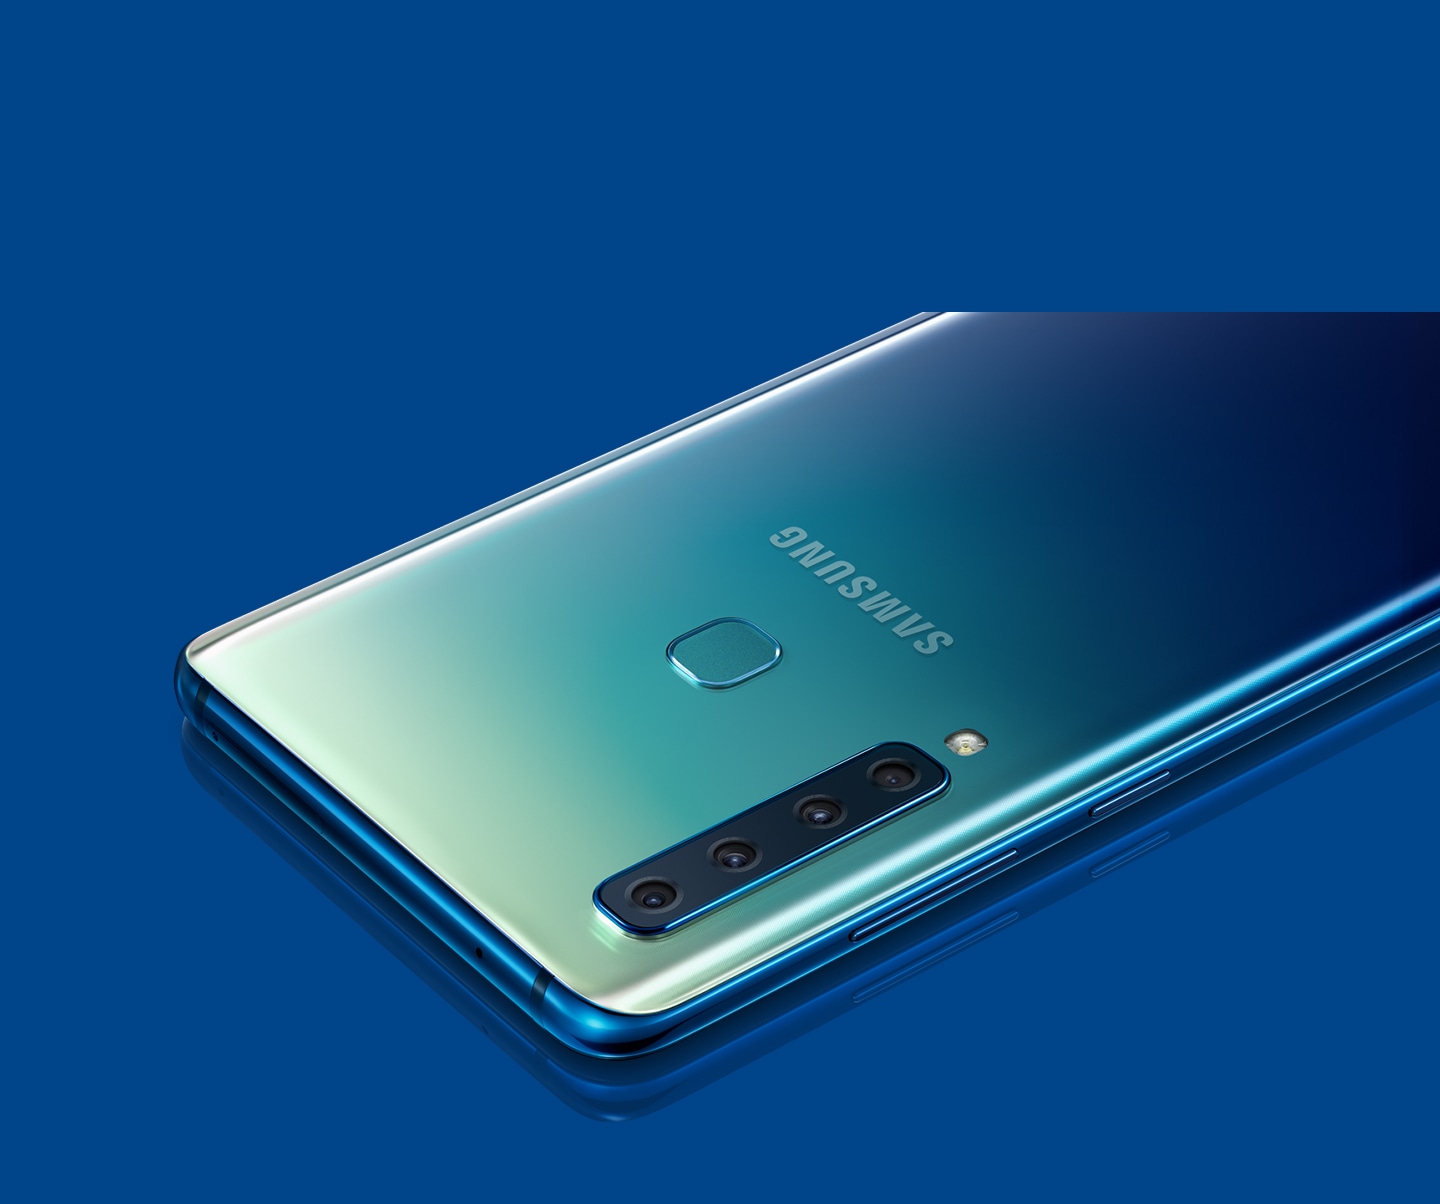 See the Samsung A9 price in the Philippines, the world's first quad-camera smartphone that helps you capture life the way it was meant to be seen